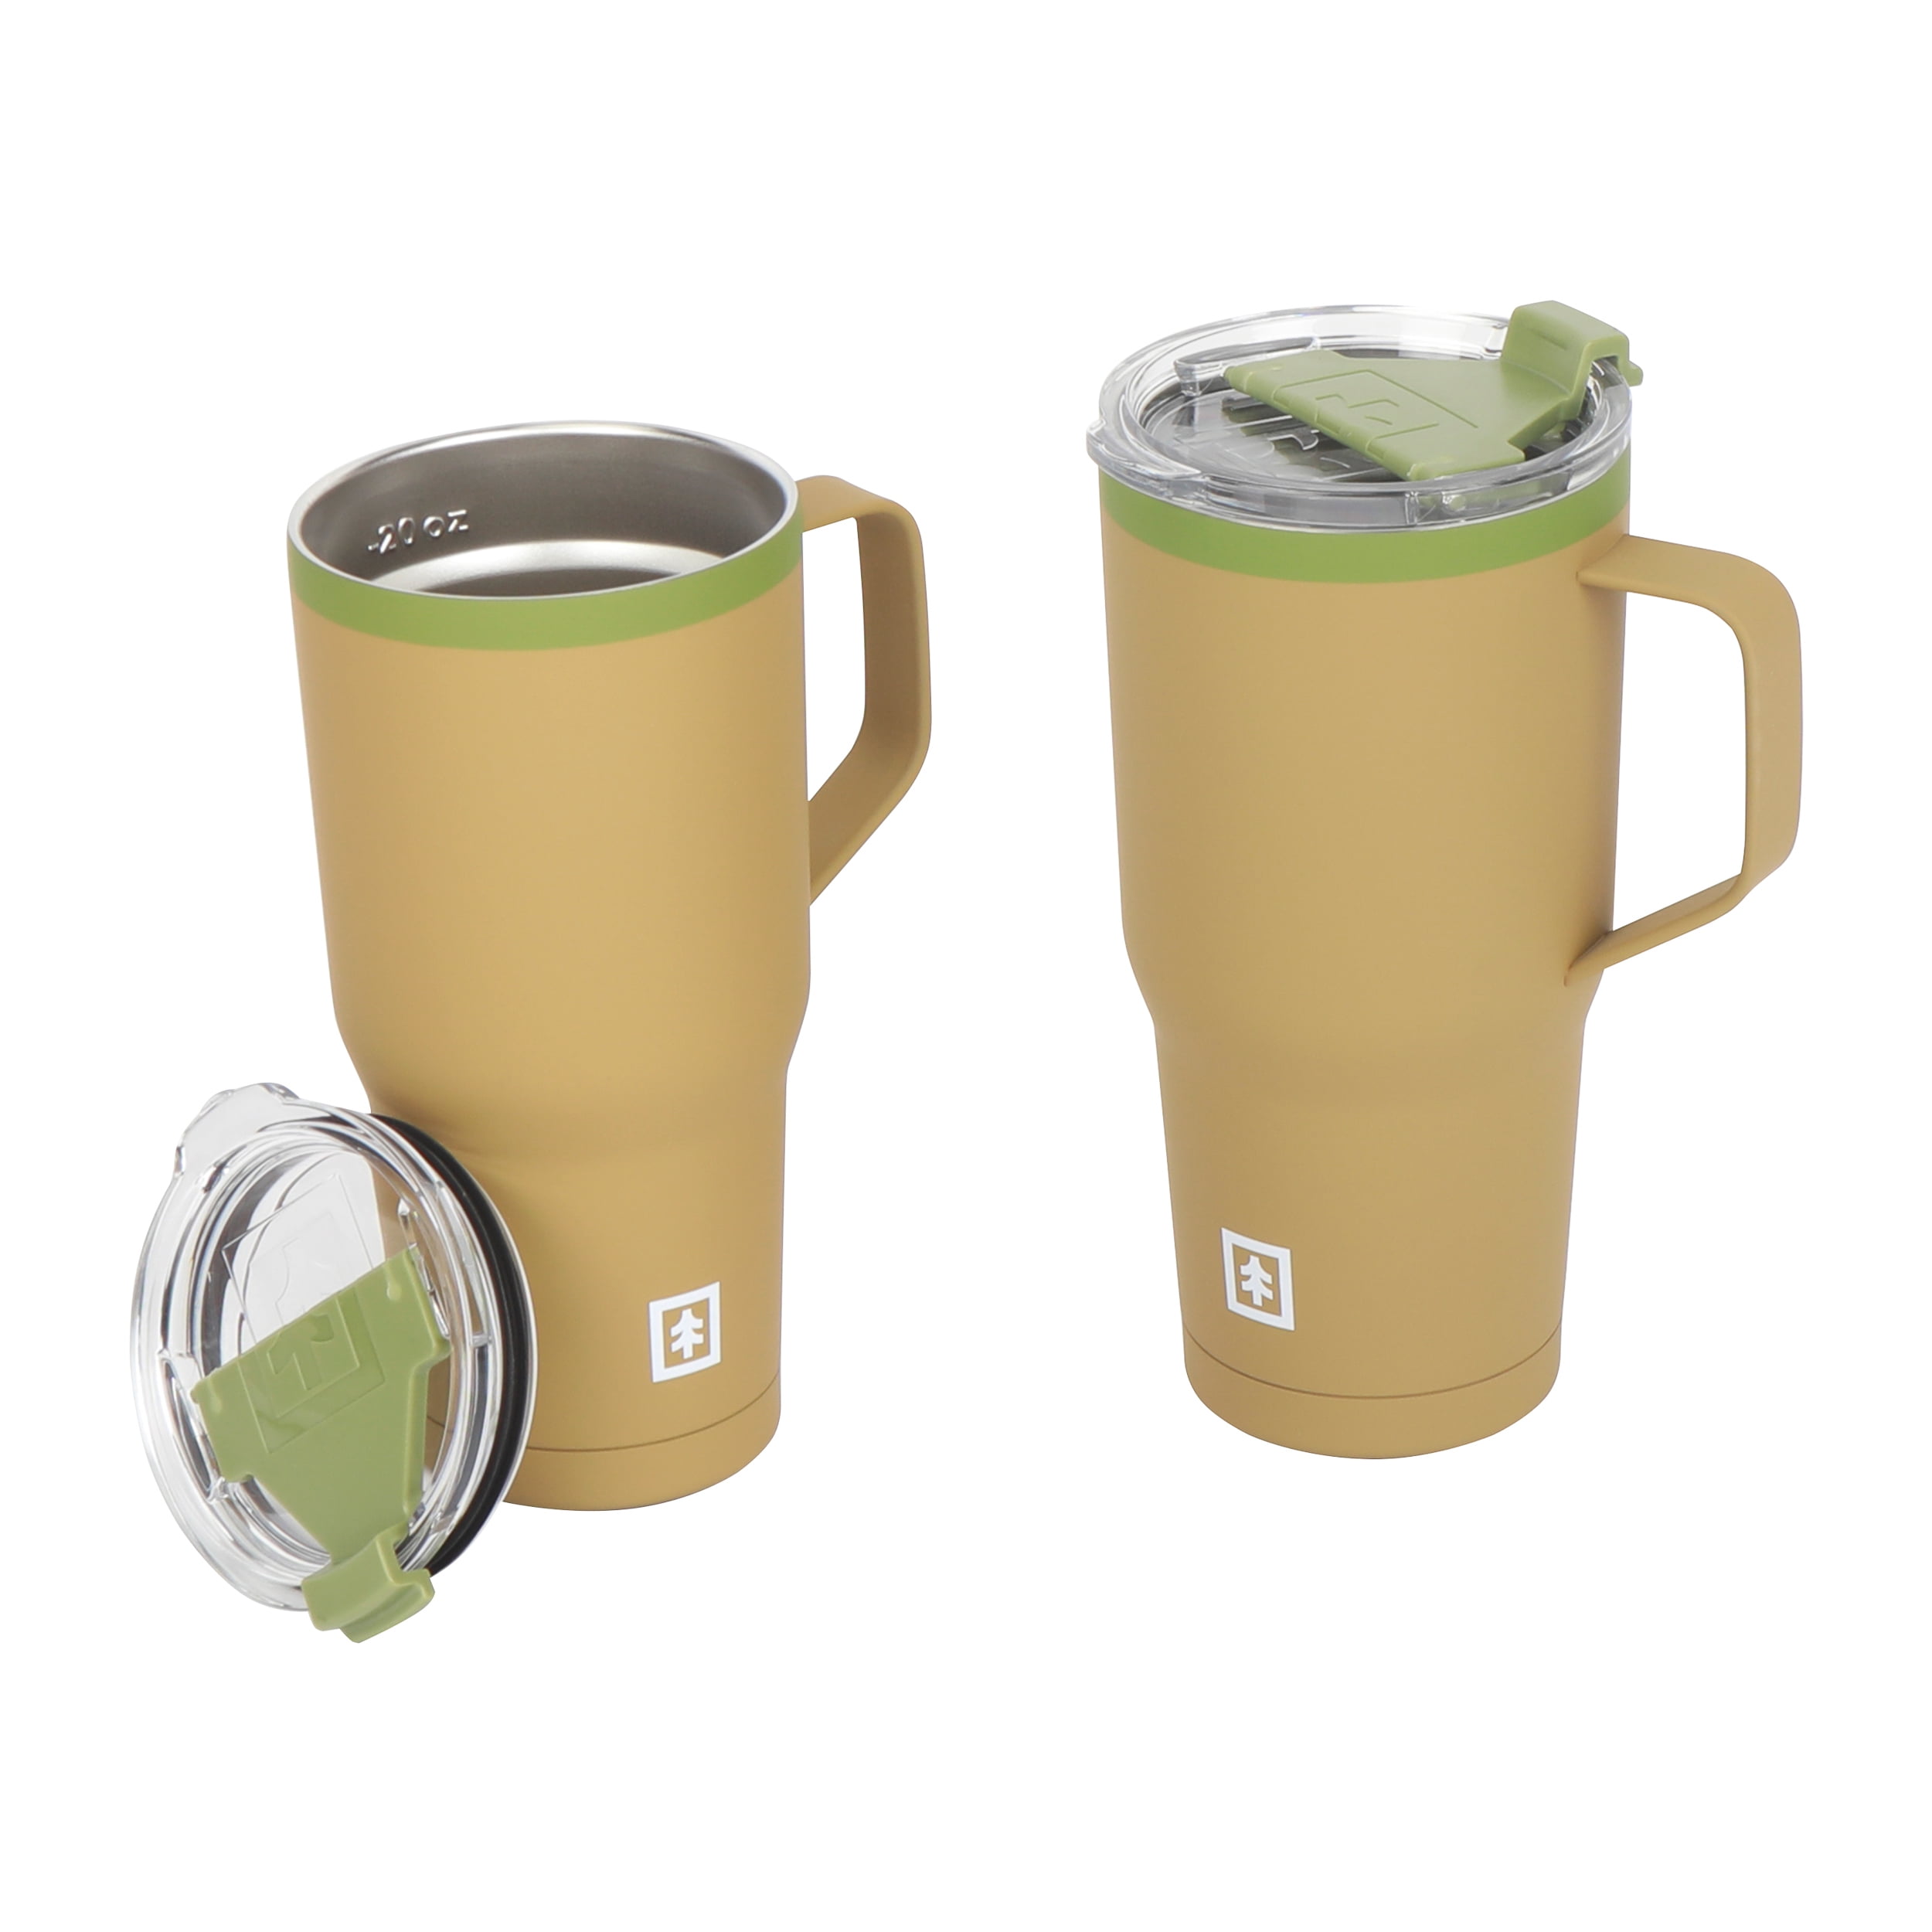 Difference Between YETI Rambler 20 oz Tumbler & Travel Mug with Handle and  Stonghold Lid 